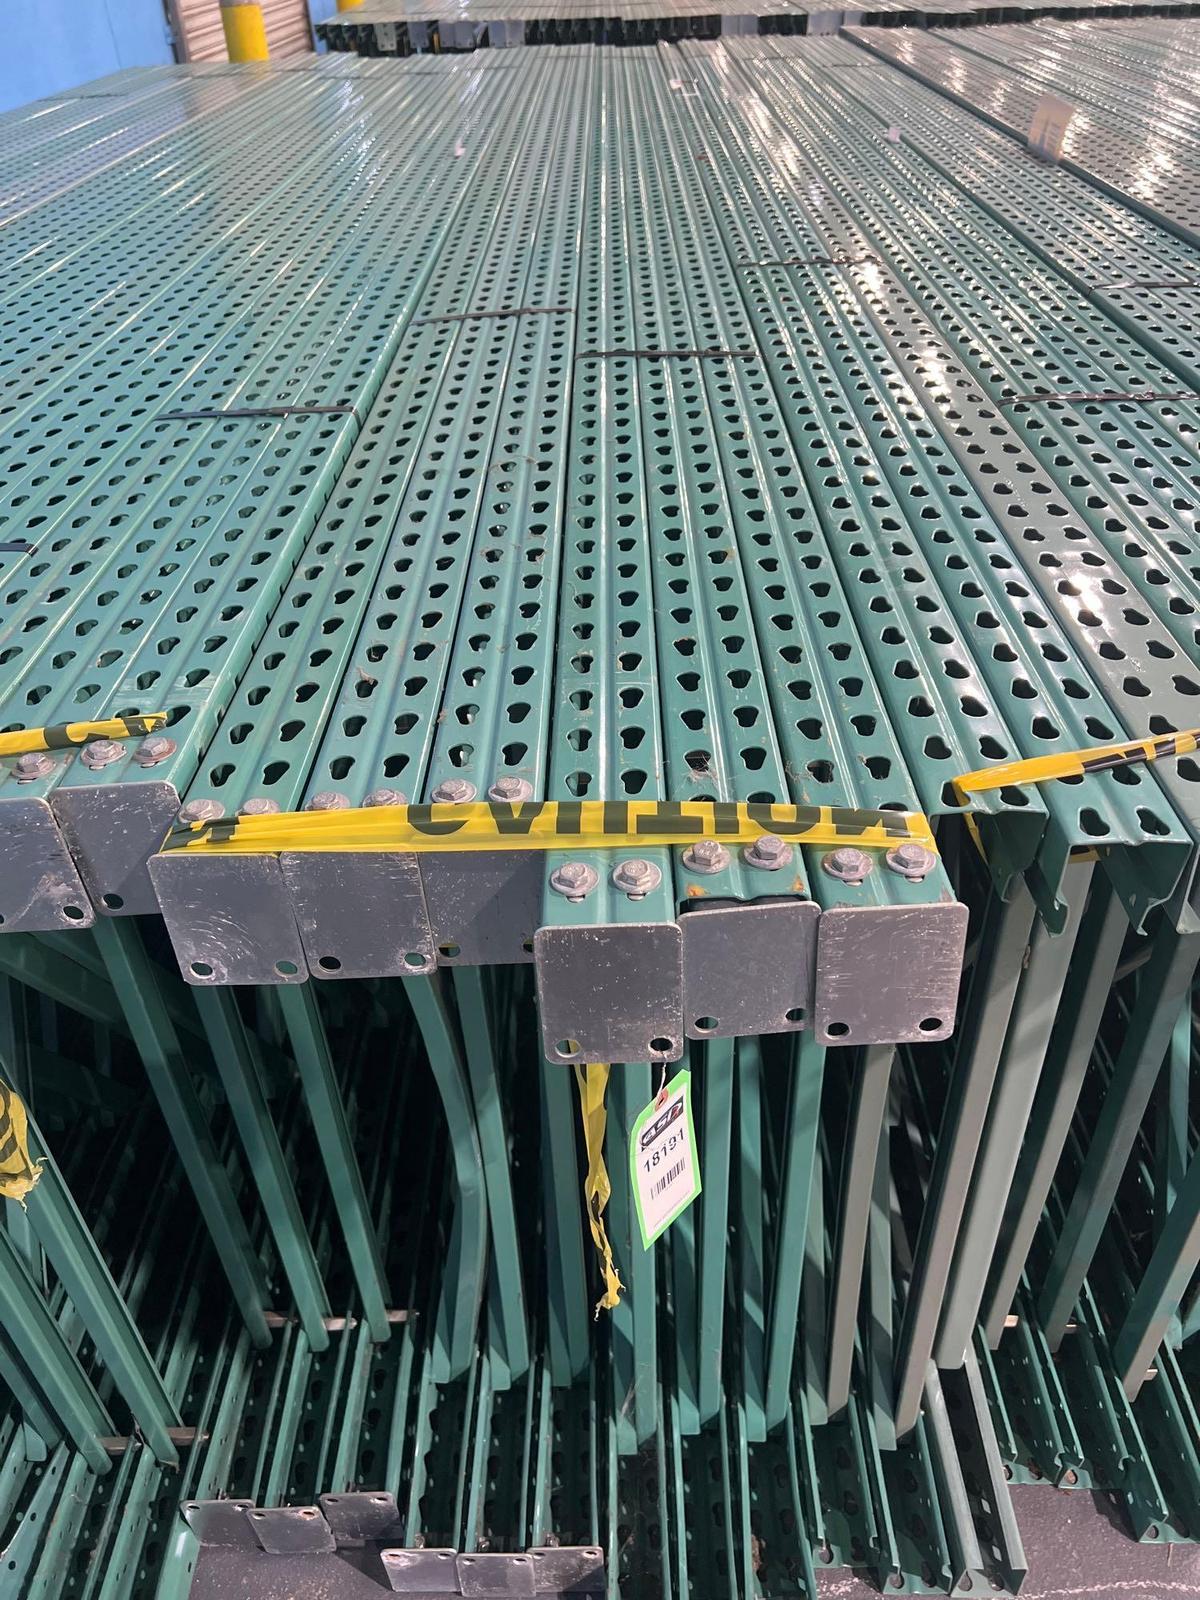 QTY) 6 PALLET RACK UP RIGHTS, 16'